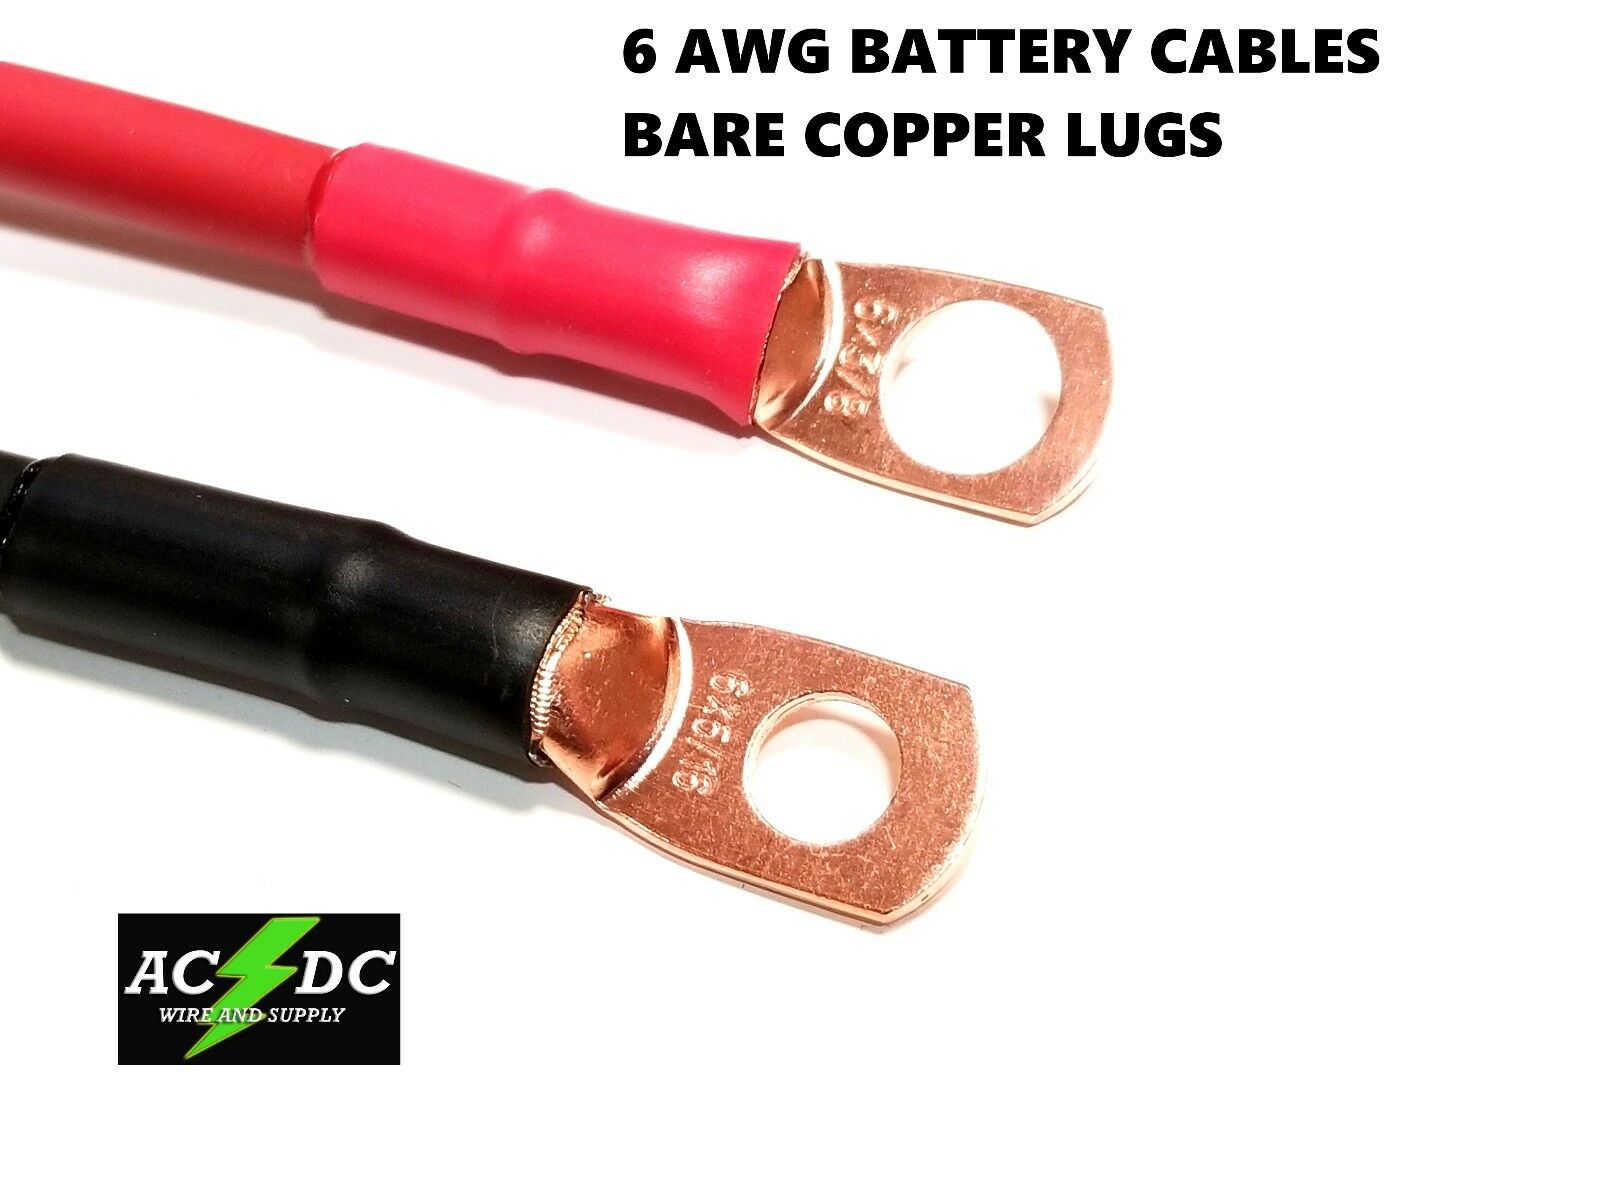 6 Awg Copper Battery Cable Power Wire Car, Inverter, Rv, Solar